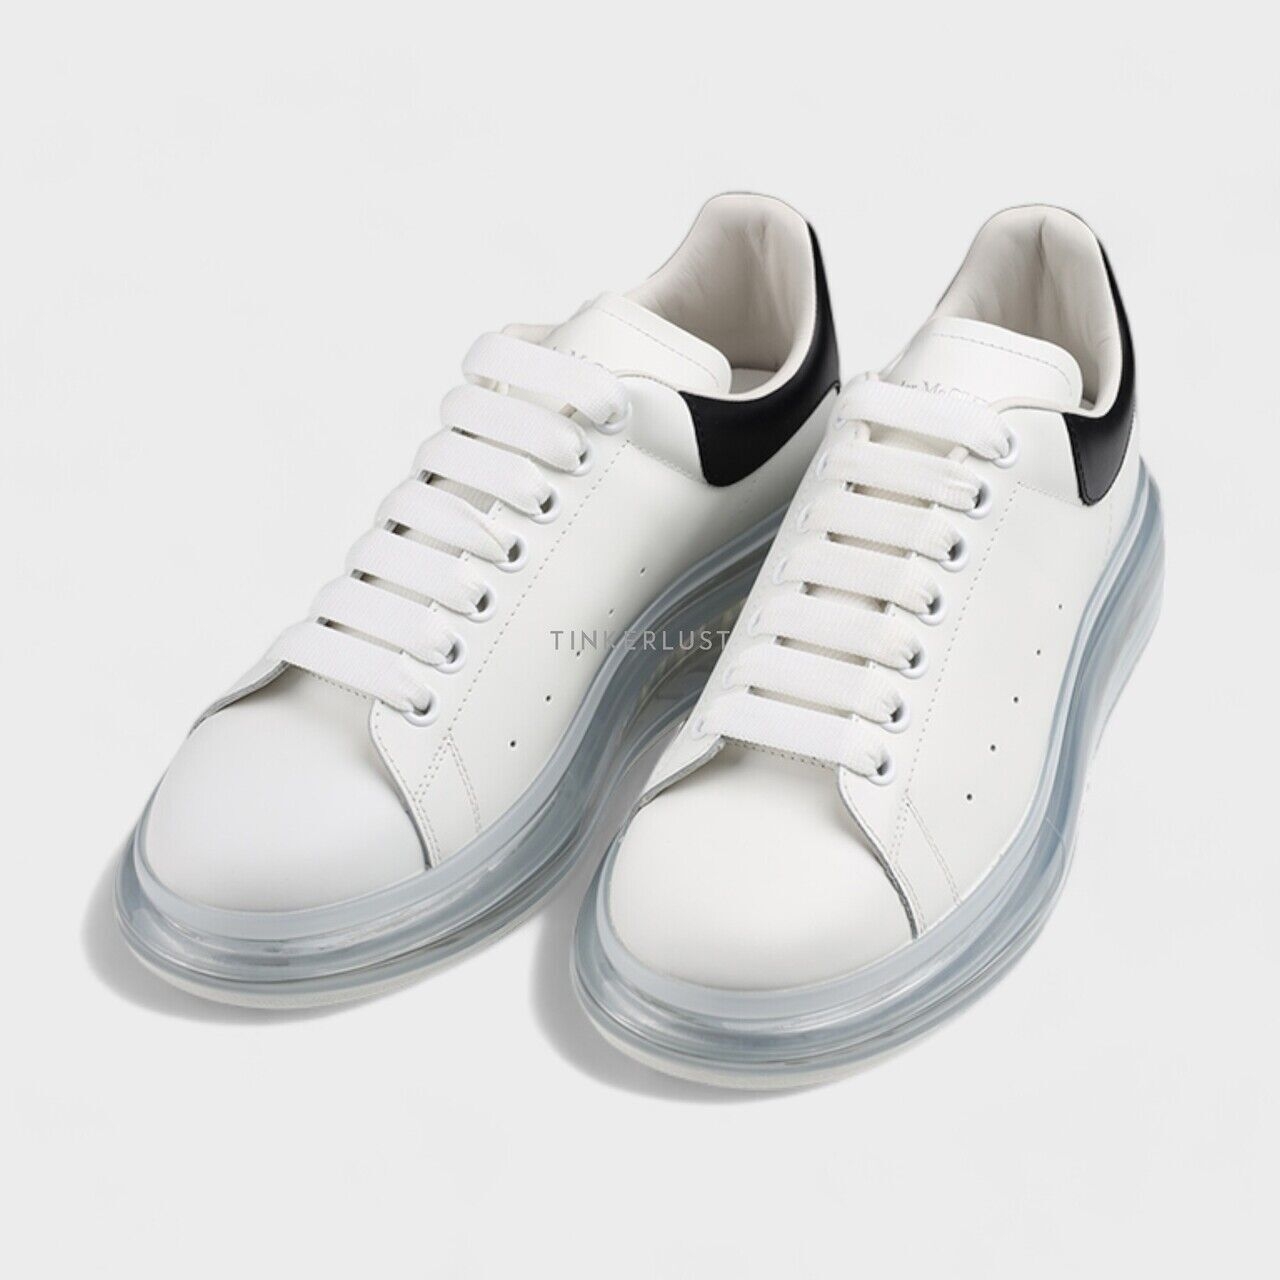 Alexander McQueen Men Transparent Oversized Lace-Up Sneakers in White/Black Smooth Leather